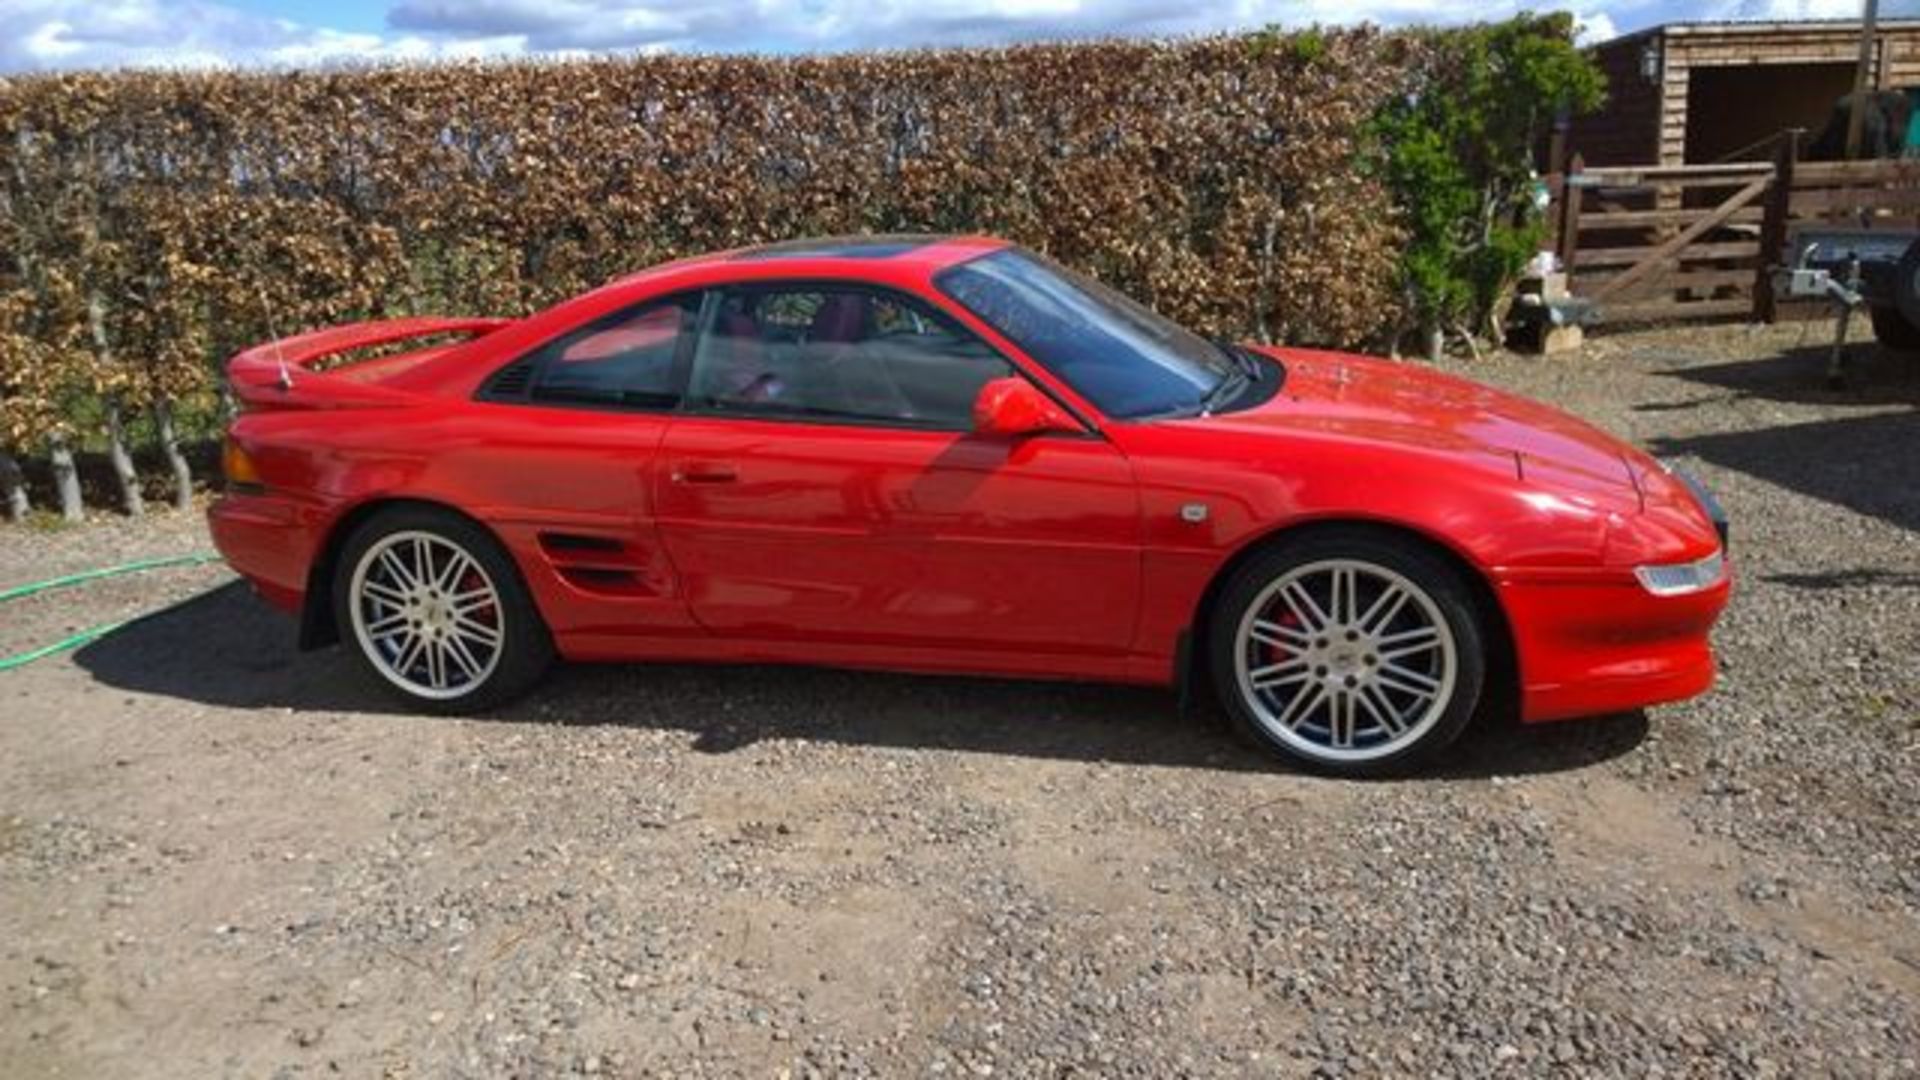 TOYOTA, MR2 GT - 1998cc, Chassis number JT163SW2000074481 - ESTIMATE £2000 - £2500, Log Book (